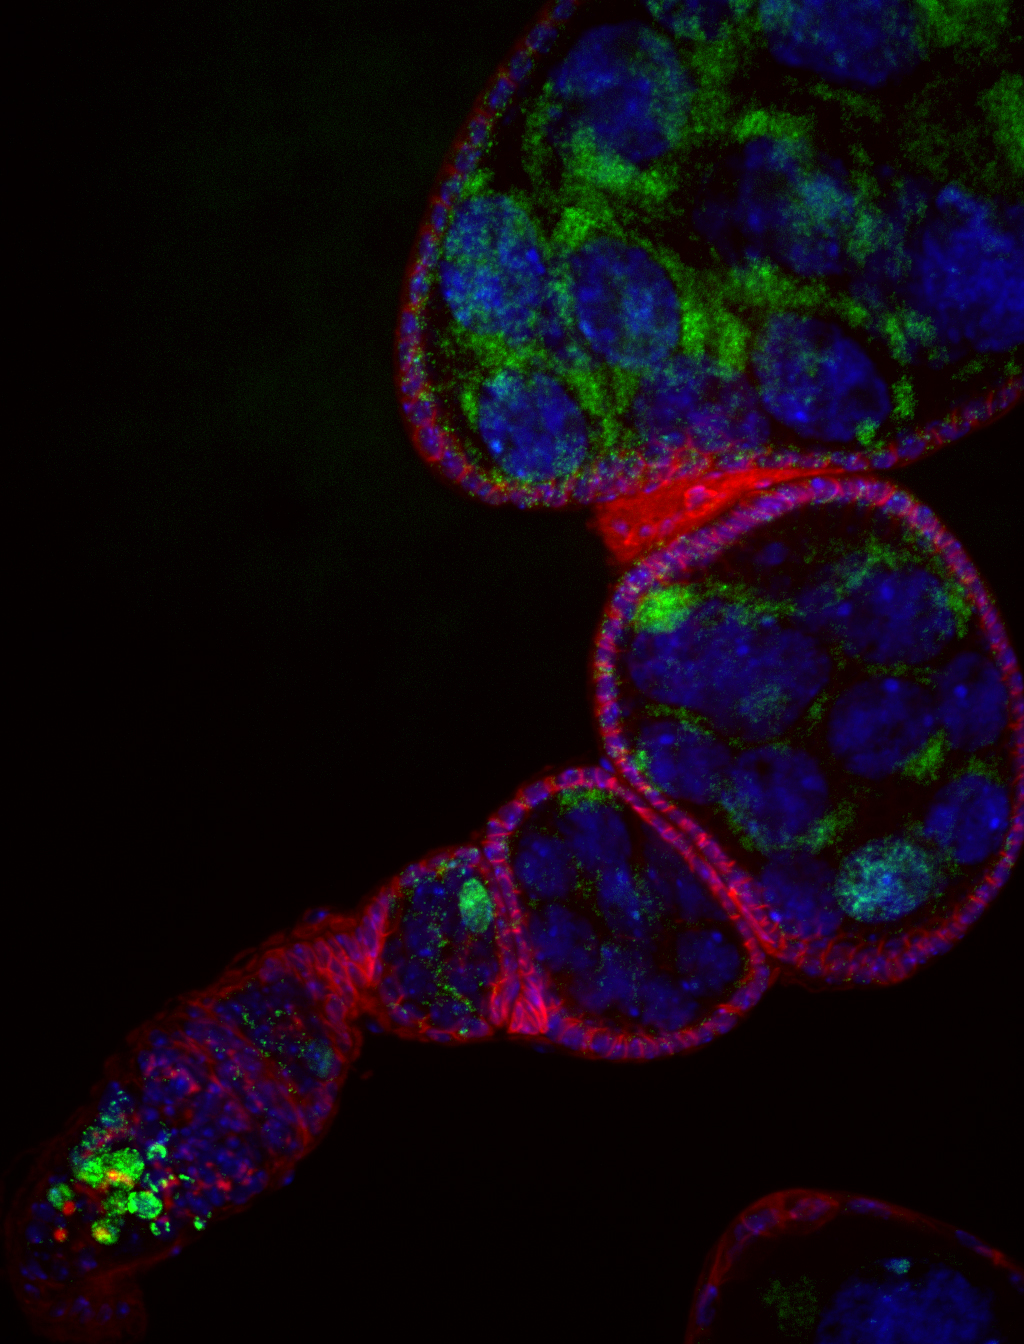 mtDNA replication in ovary illustrated by EdU incorporation in green fluorescence